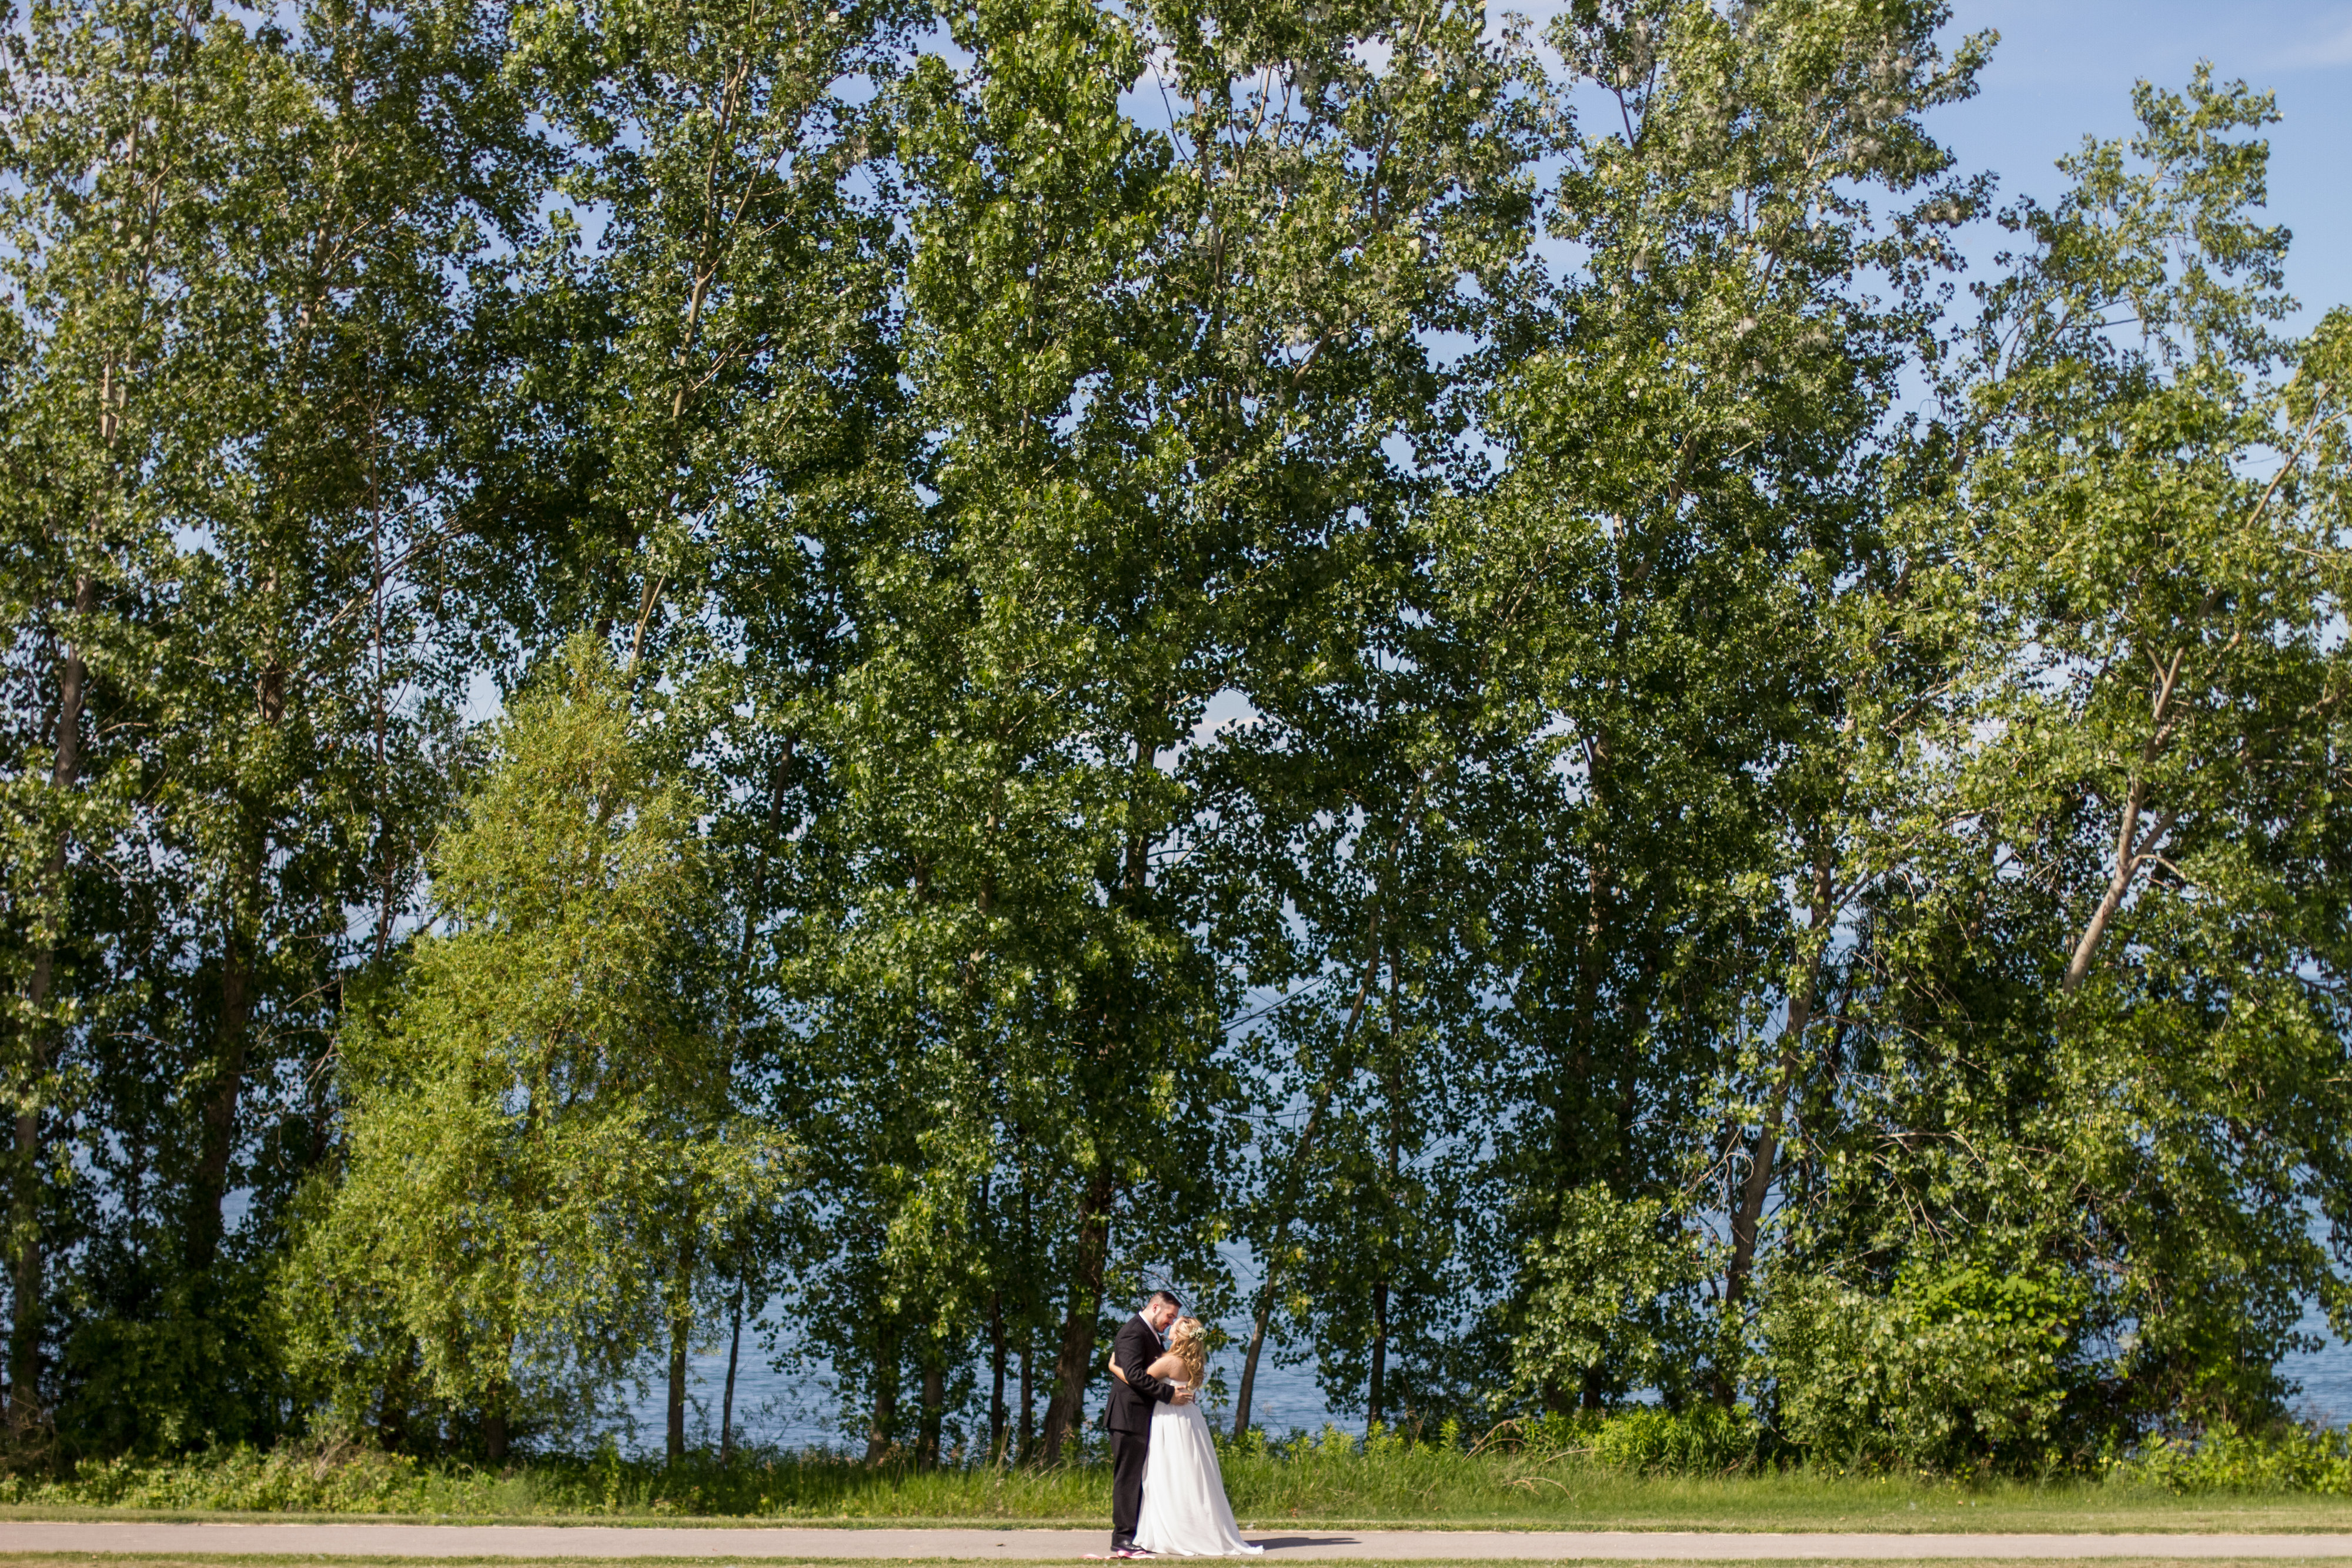 Our 2nd Anniversary - Photos From Our Big Day | Coffee With Summer